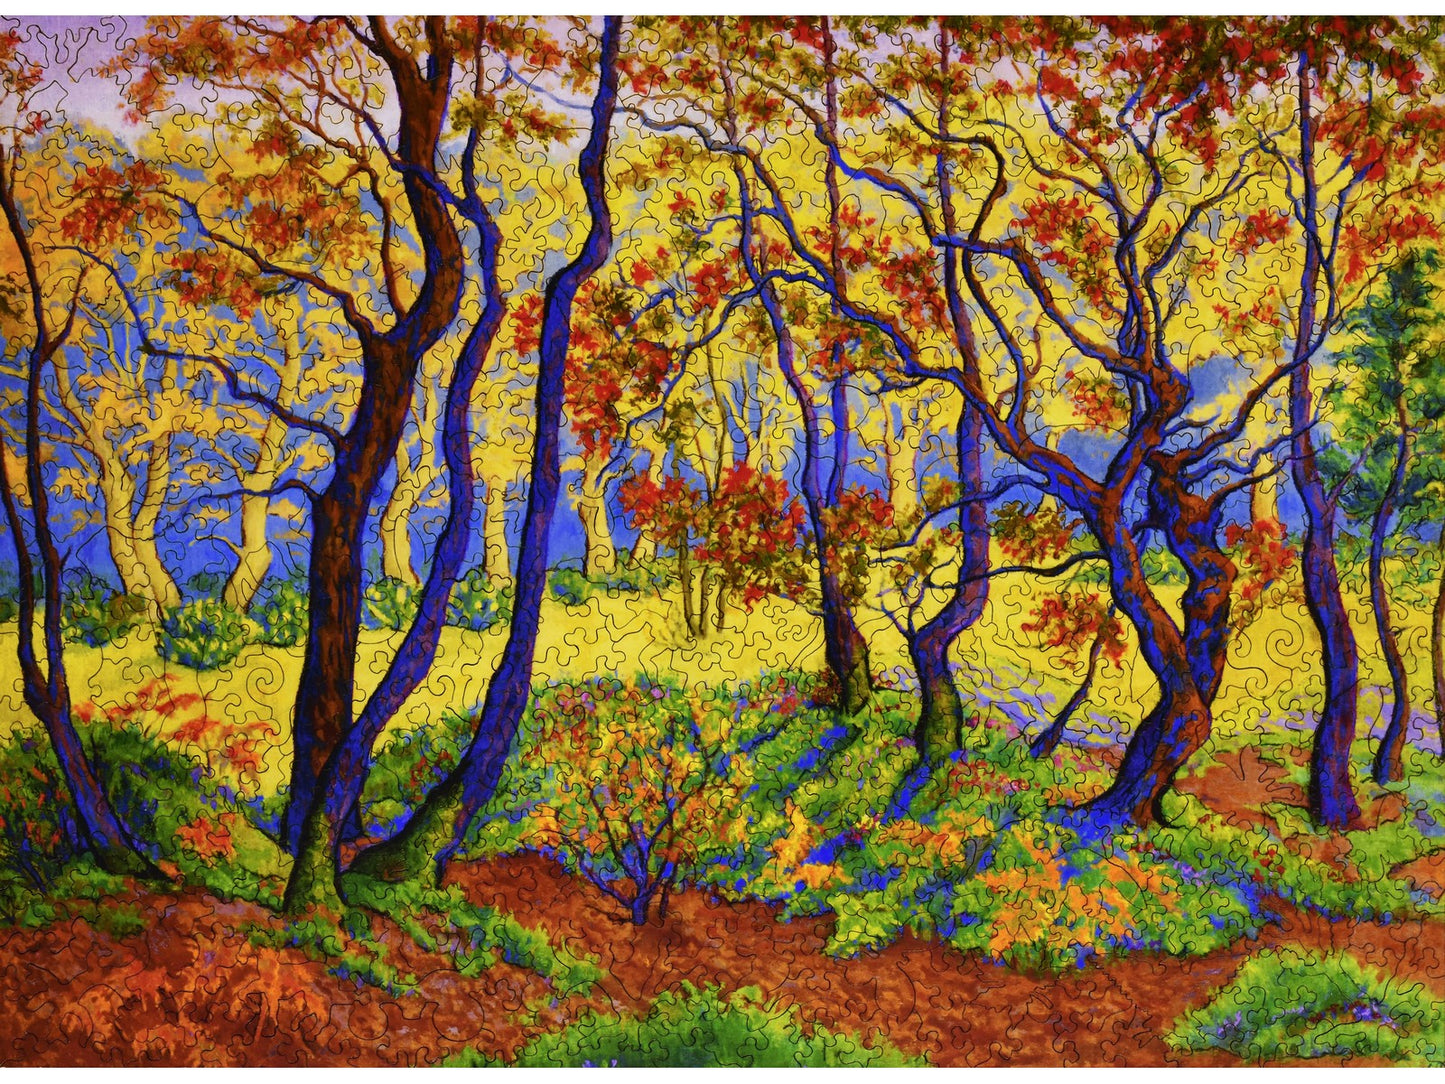 The front of the puzzle, Edge of the Forest, which shows a colorful forest scene.